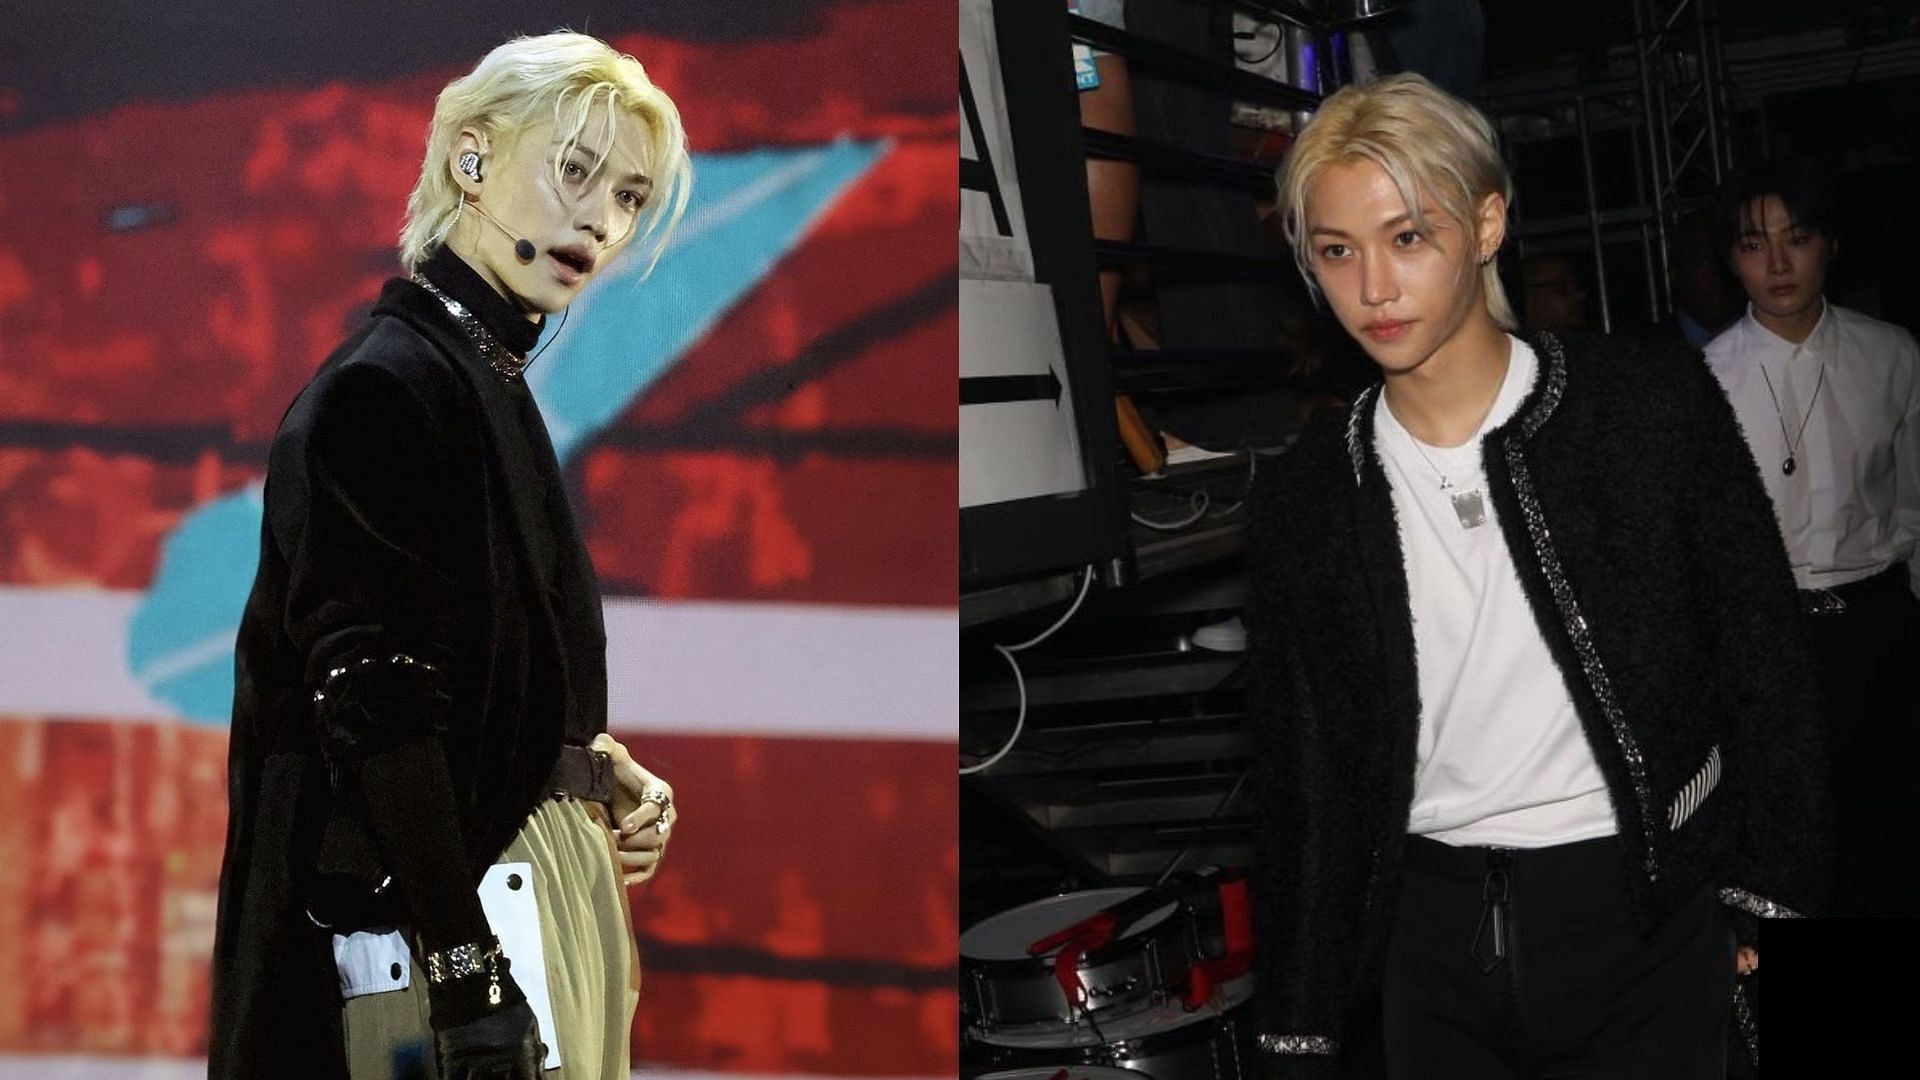 Viral Takes on X: Felix of Stray Kids is now confirmed to be